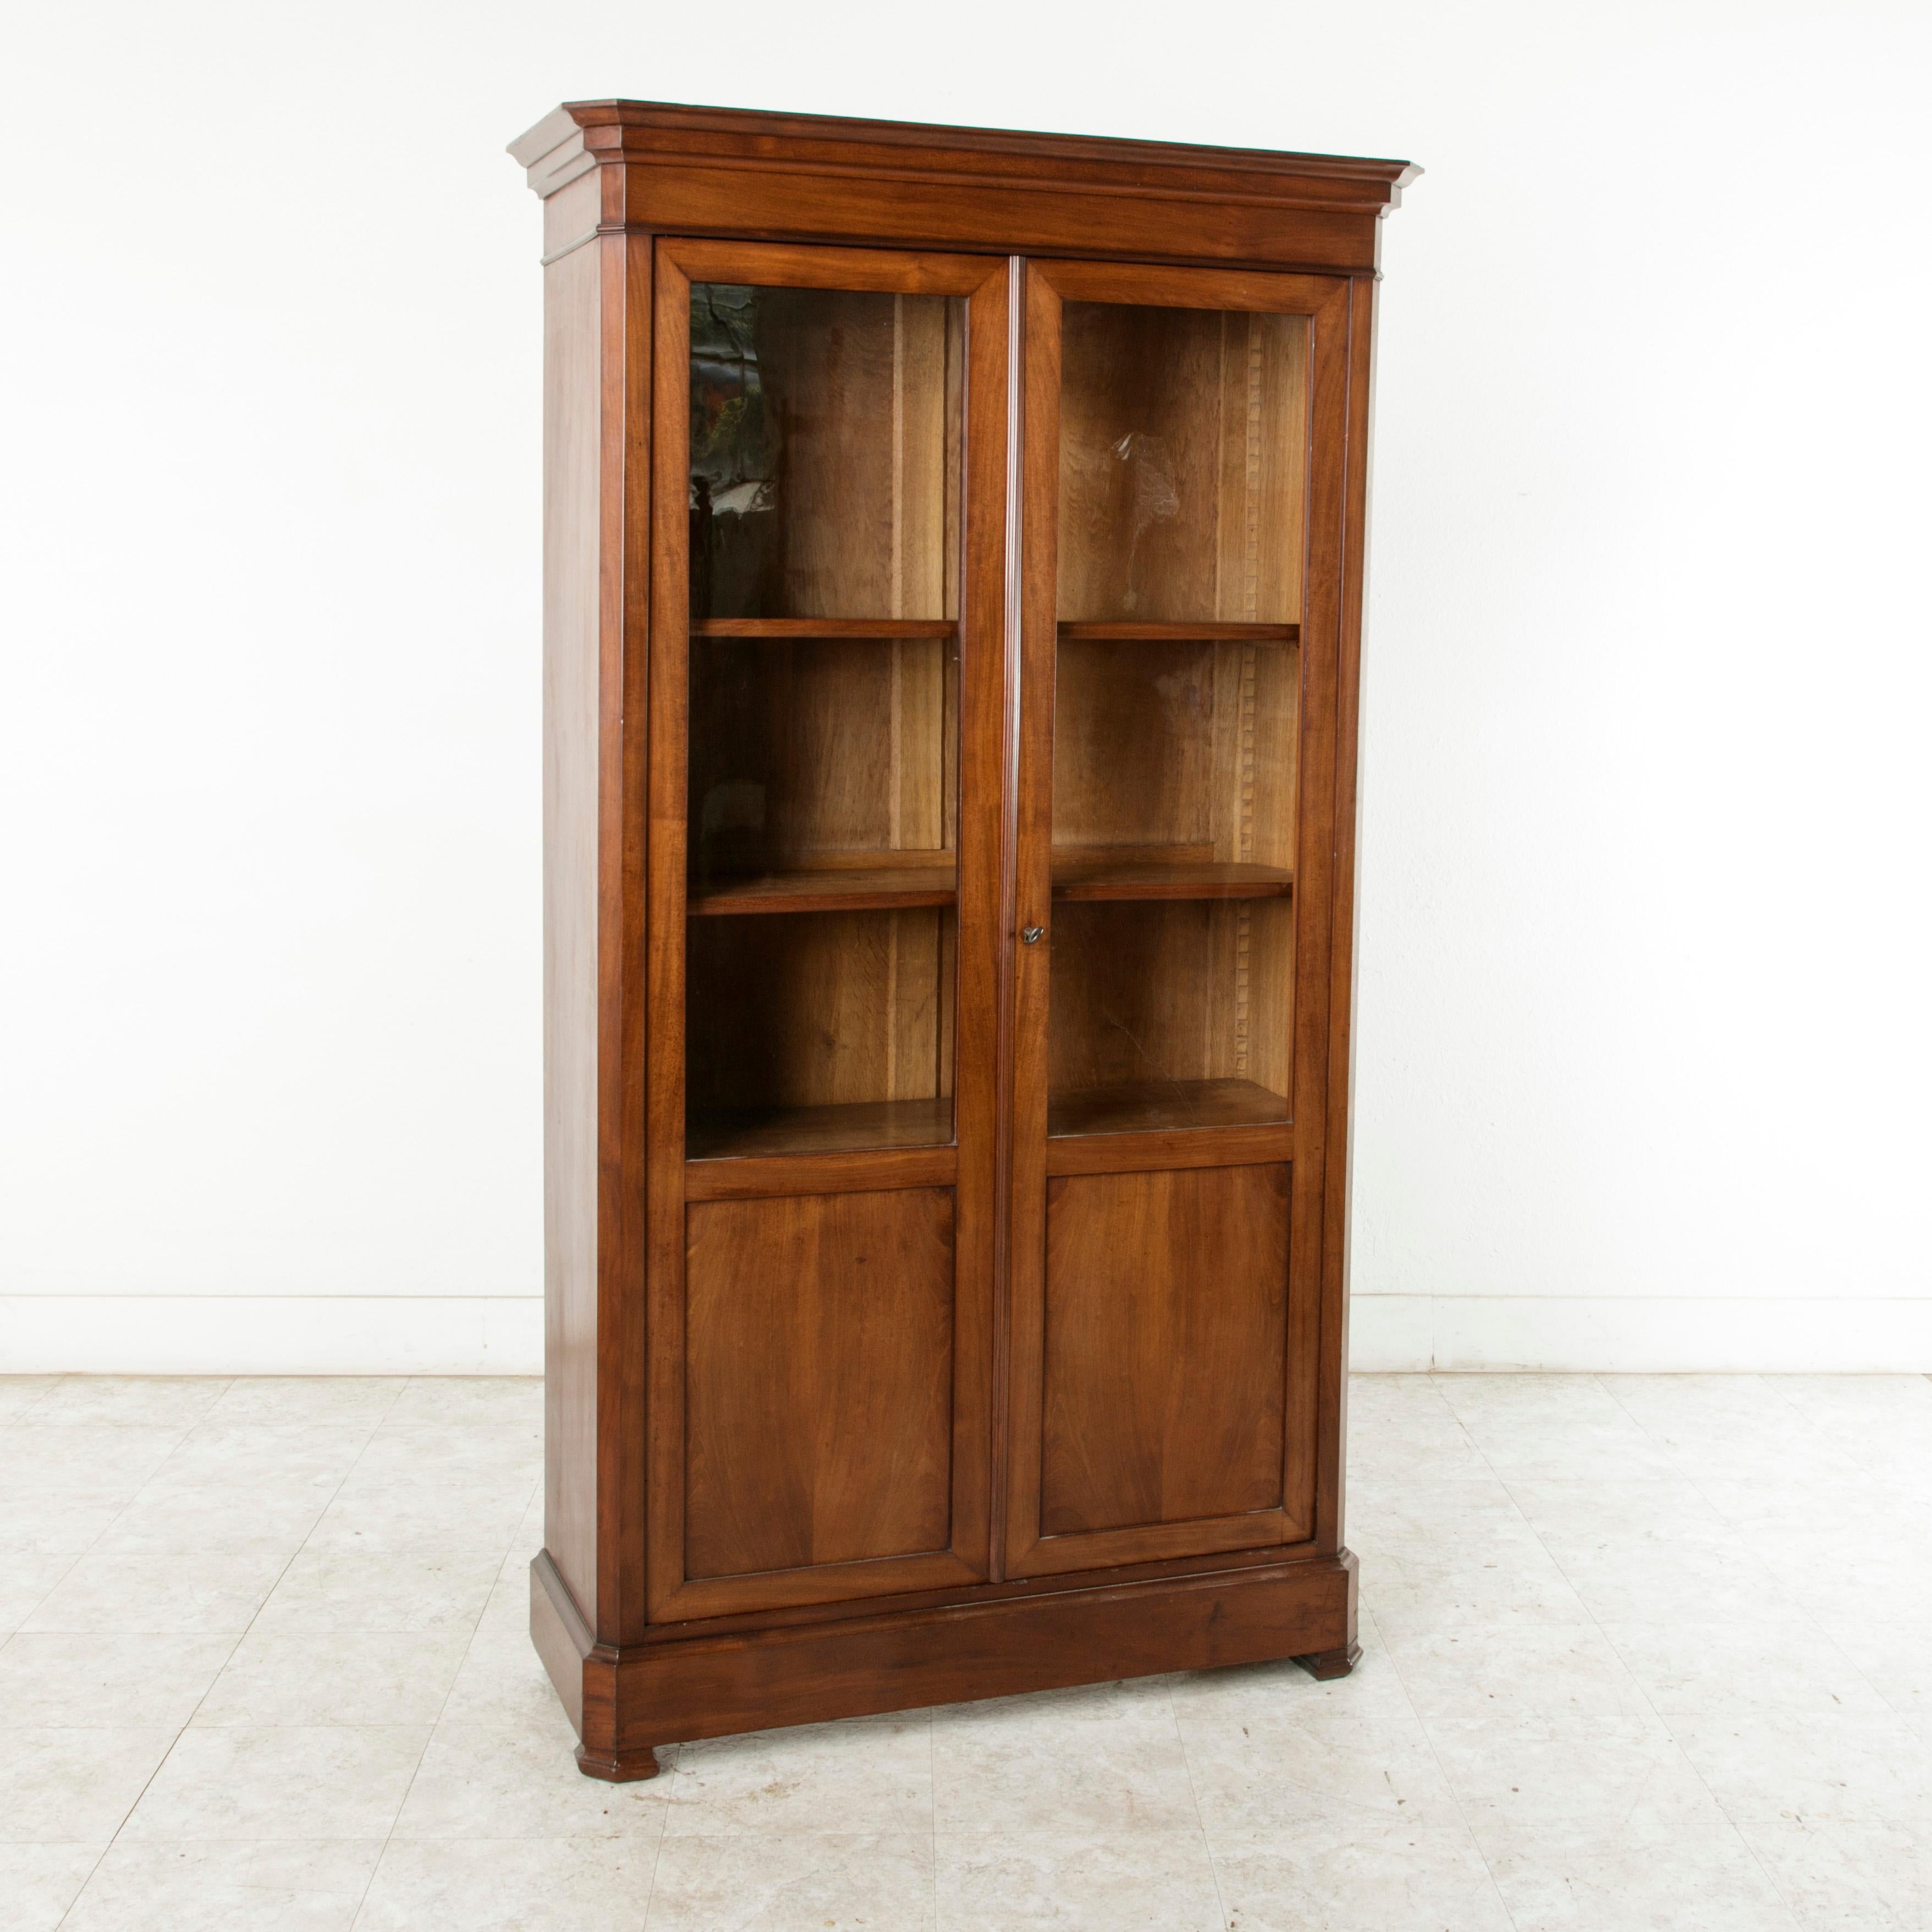 This 19th century Louis Philippe period mahogany bibliothèque, bookcase, or vitrine features simple, handsome lines and two doors inset with their original glass. It has four adjustable interior shelves for ample storage and display space. The warm